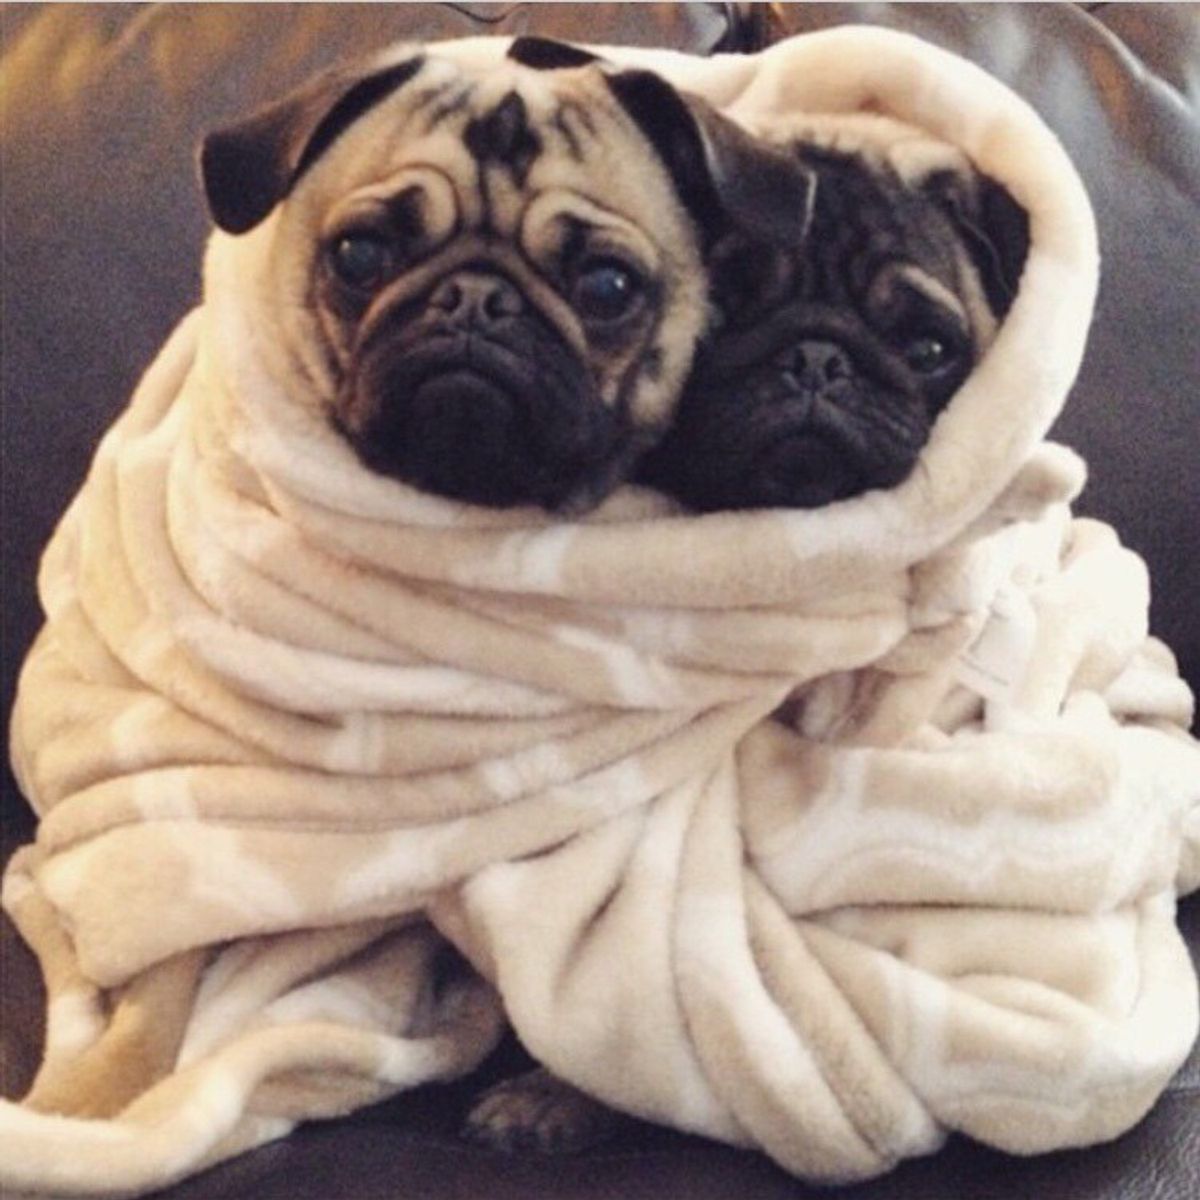 19 Struggles For People Who Are Always Cold